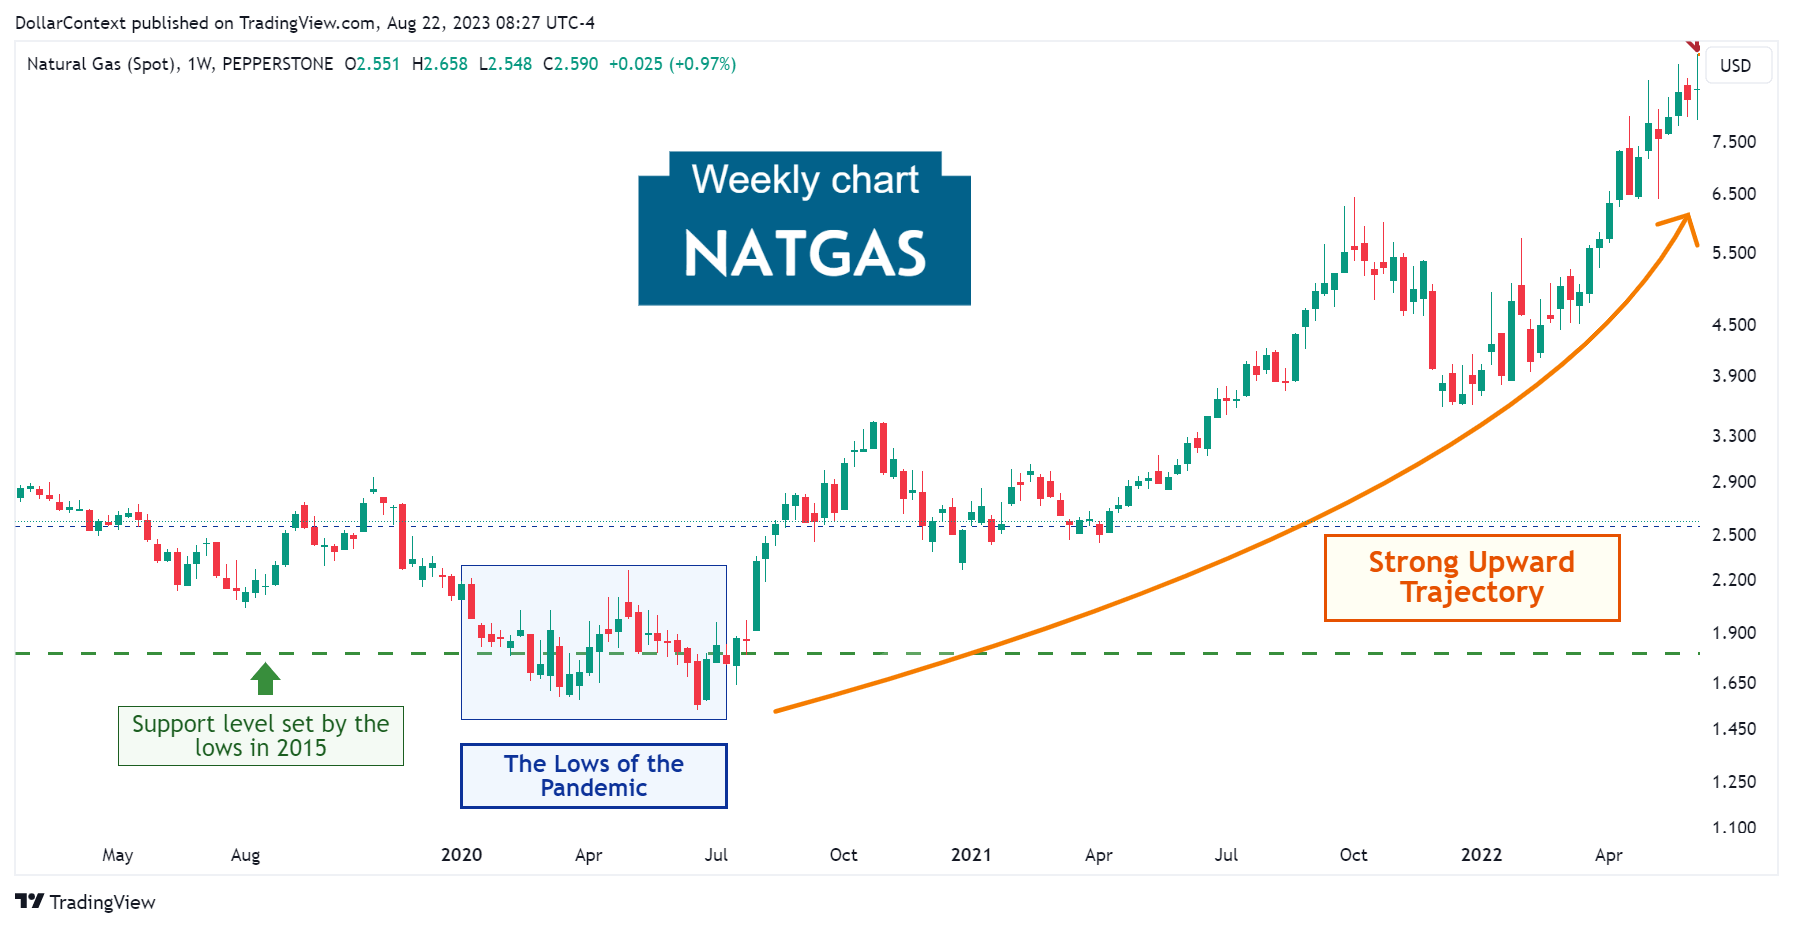 Natural Gas Spot: Solid Uptrend from July 2020 to April 2022 (Weekly Chart)